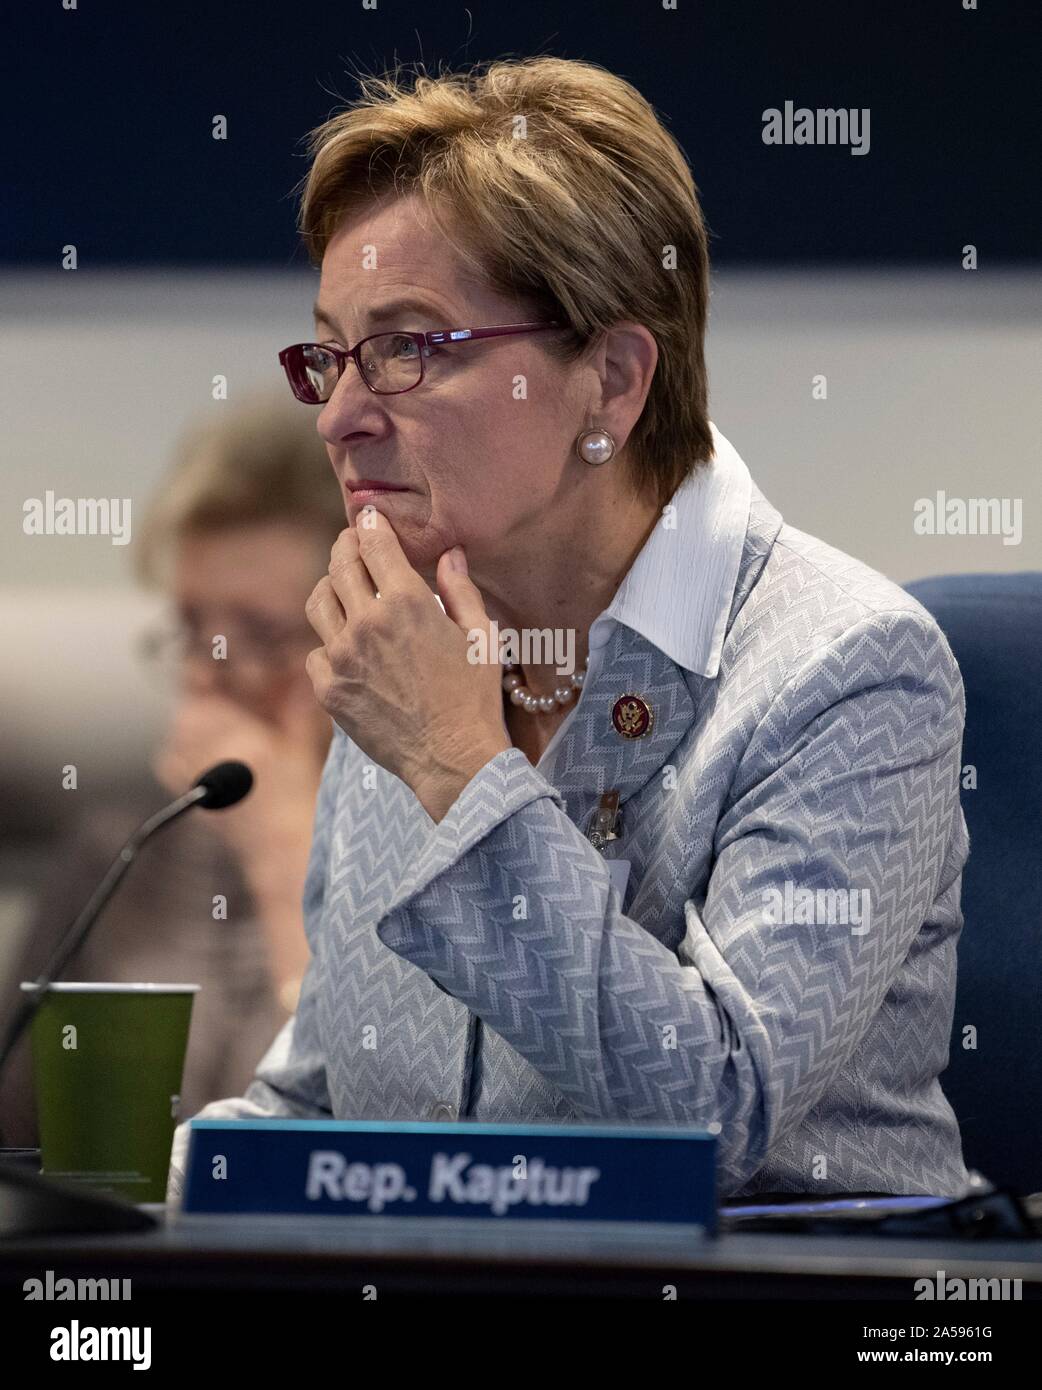 Washington, United States of America. 18 October, 2019. U.S. Rep. Marcy Kaptur of Ohio, watches NASA astronauts Christina Koch and Jessica Meir during the first all-woman spacewalk from the Space Operations Center October 18, 2019 in Washington, DC. Credit: Joel Kowsky/NASA/Alamy Live News Stock Photo